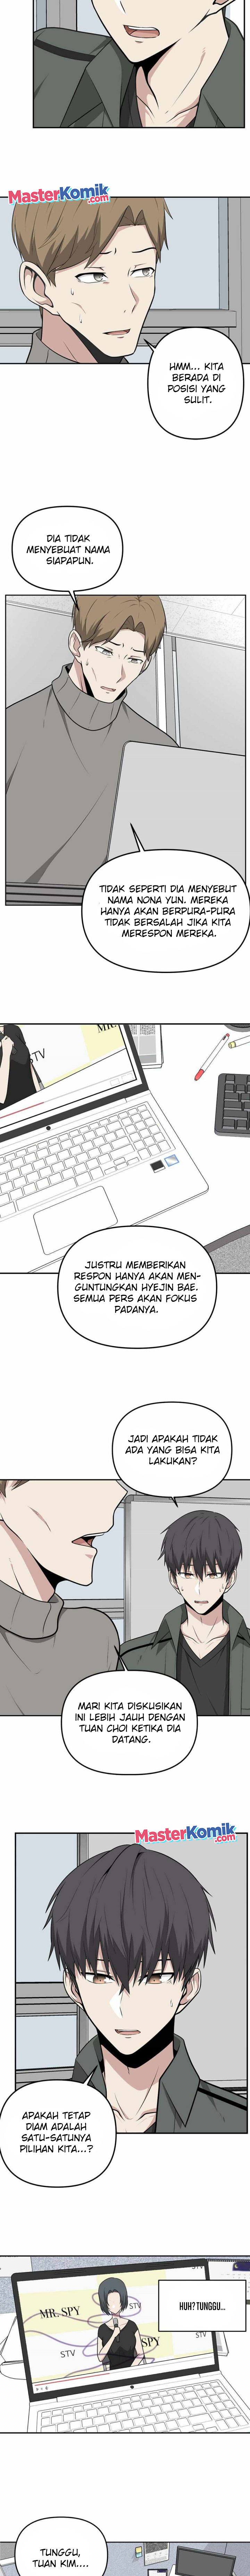 Where Are You Looking, Manager? Chapter 14 12